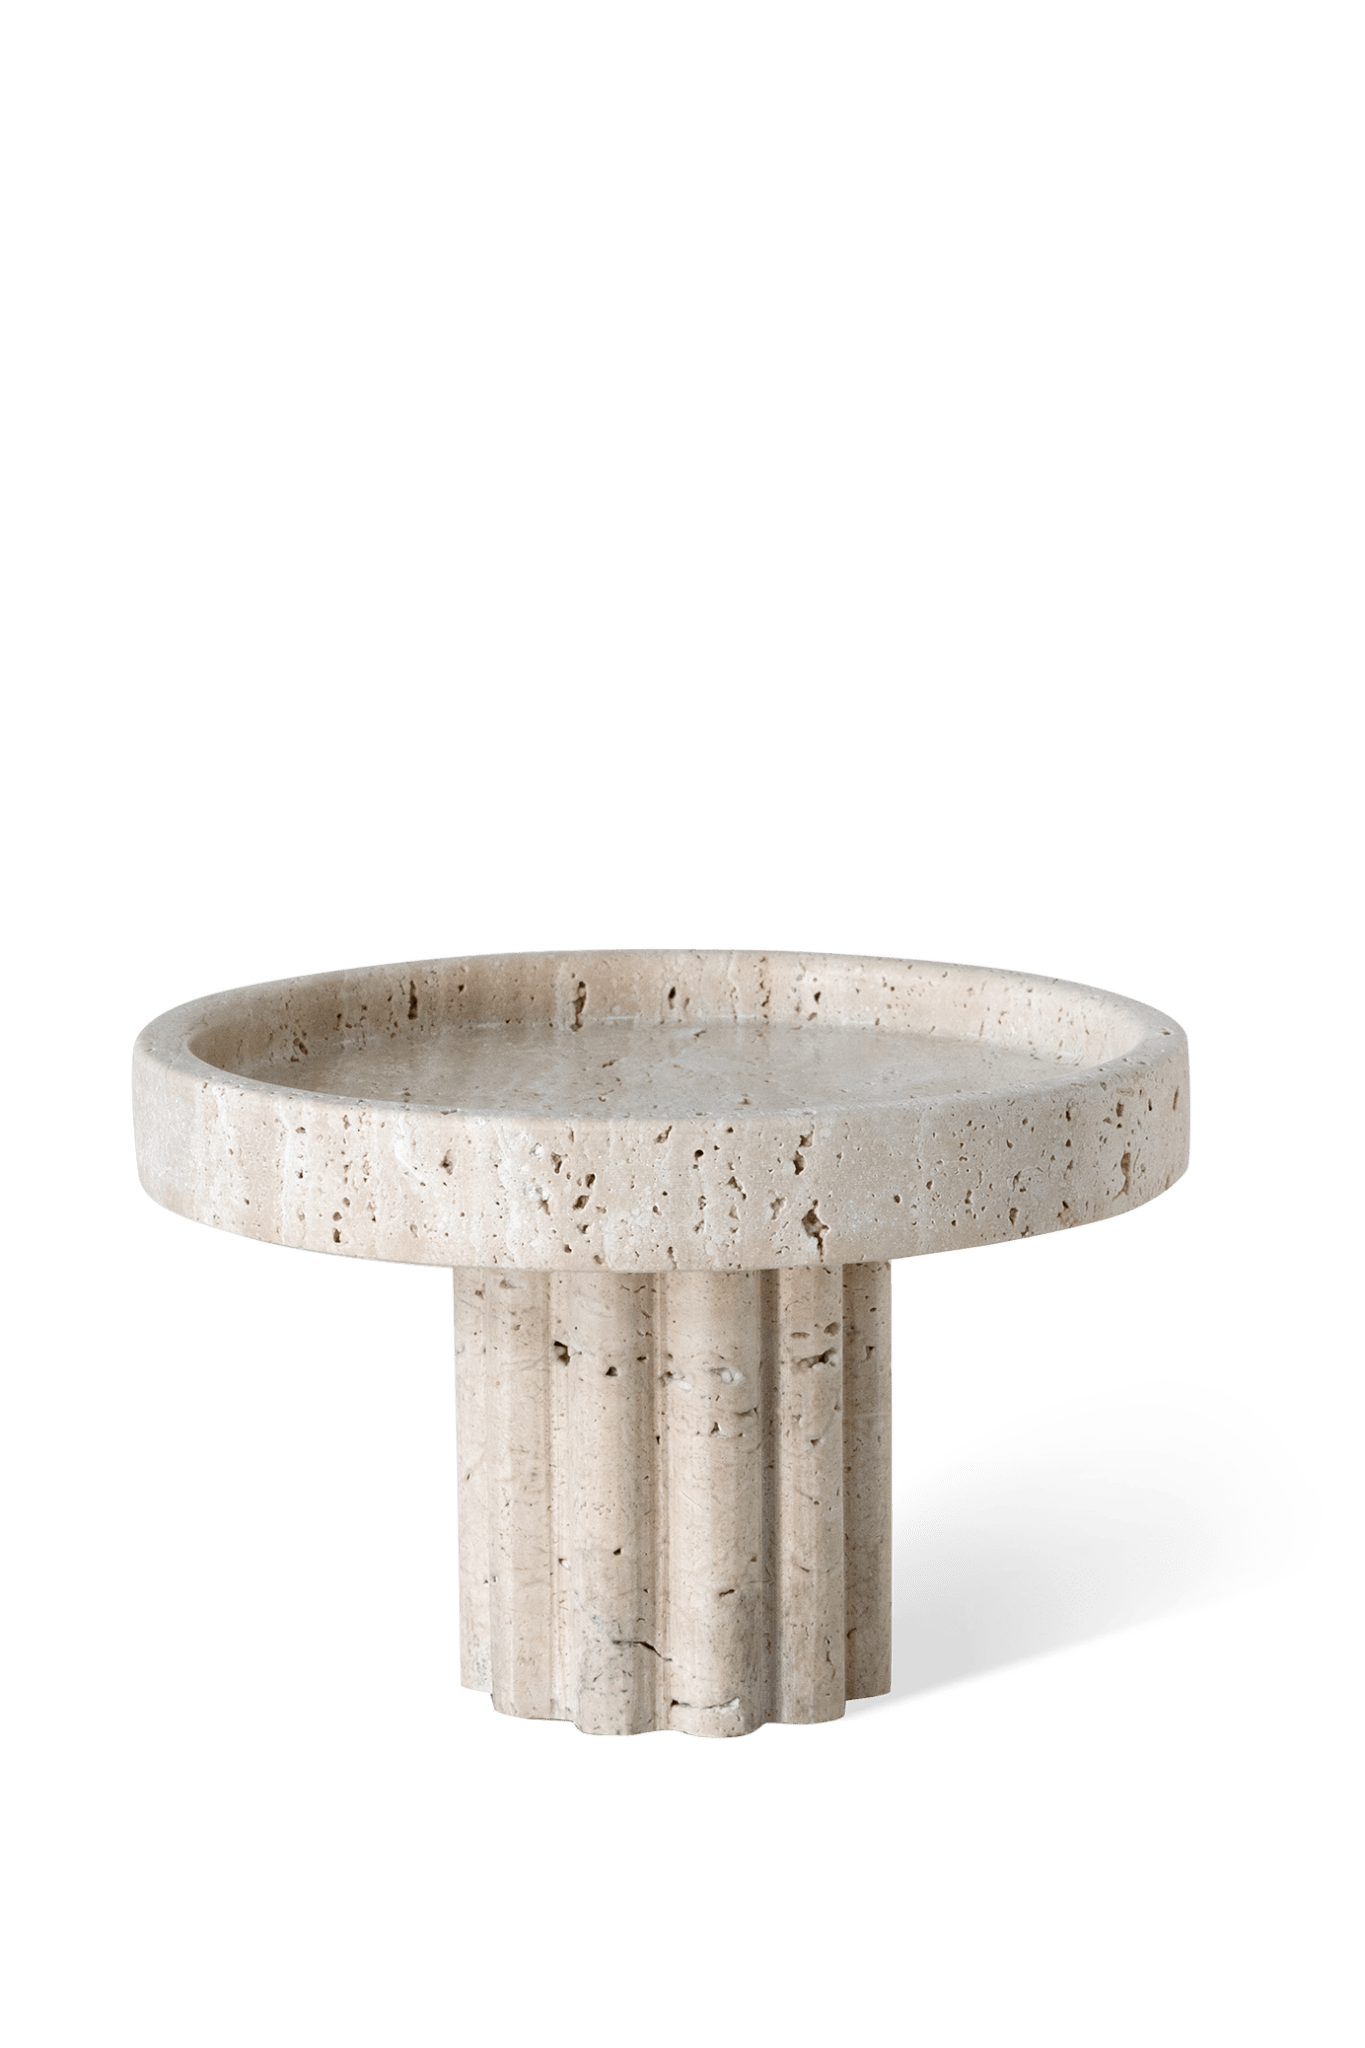 With the timeless pillar look leg design, the Column Tray is a perfect highlight to any room. Crafted from high quality natural stone, this tray could be used as a table organiser for perf